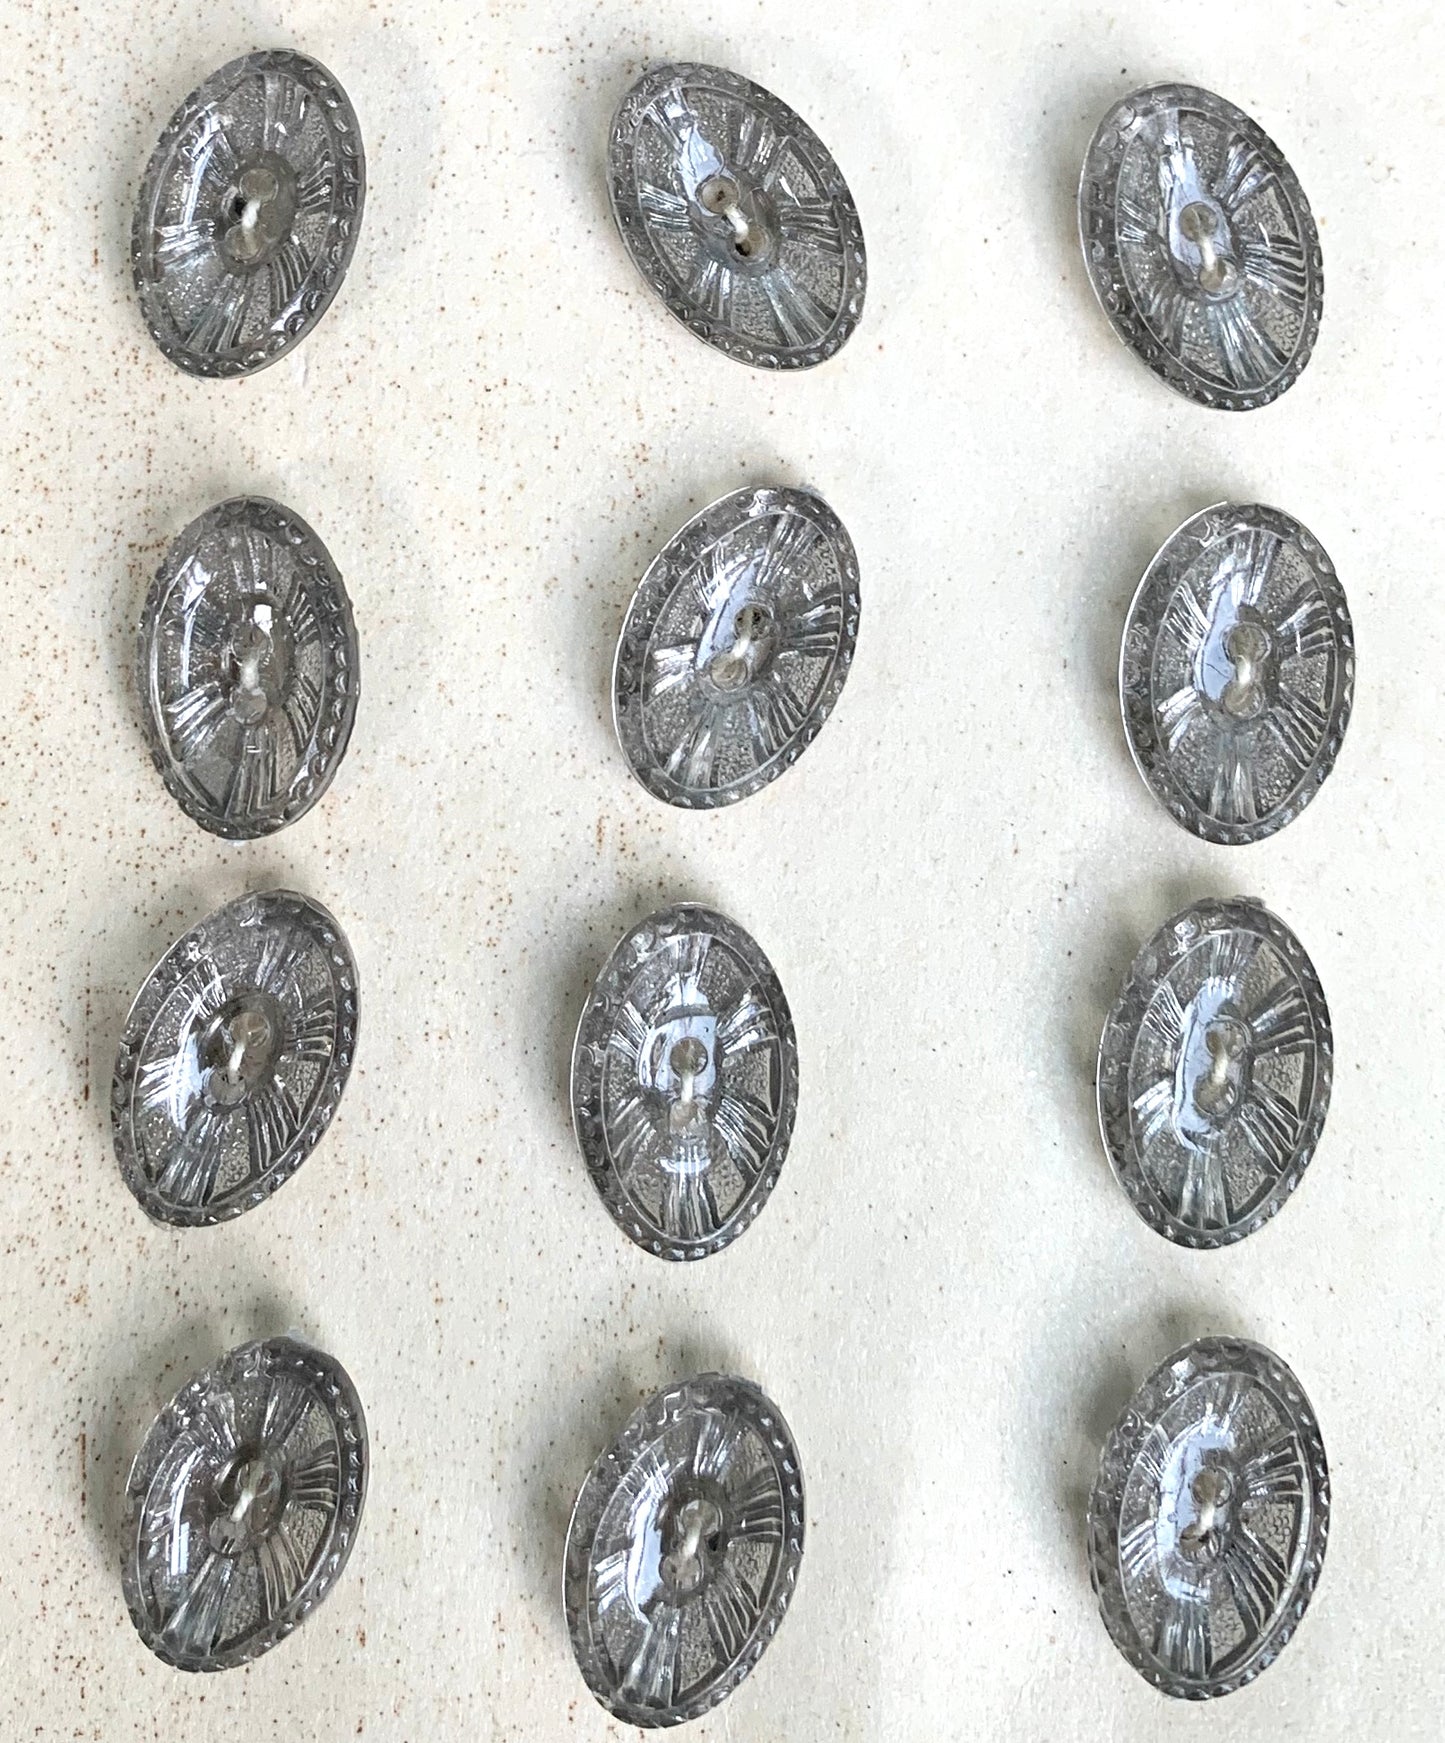 Sparkly Silvery Grey Elliptical  Vintage Buttons 13mm long